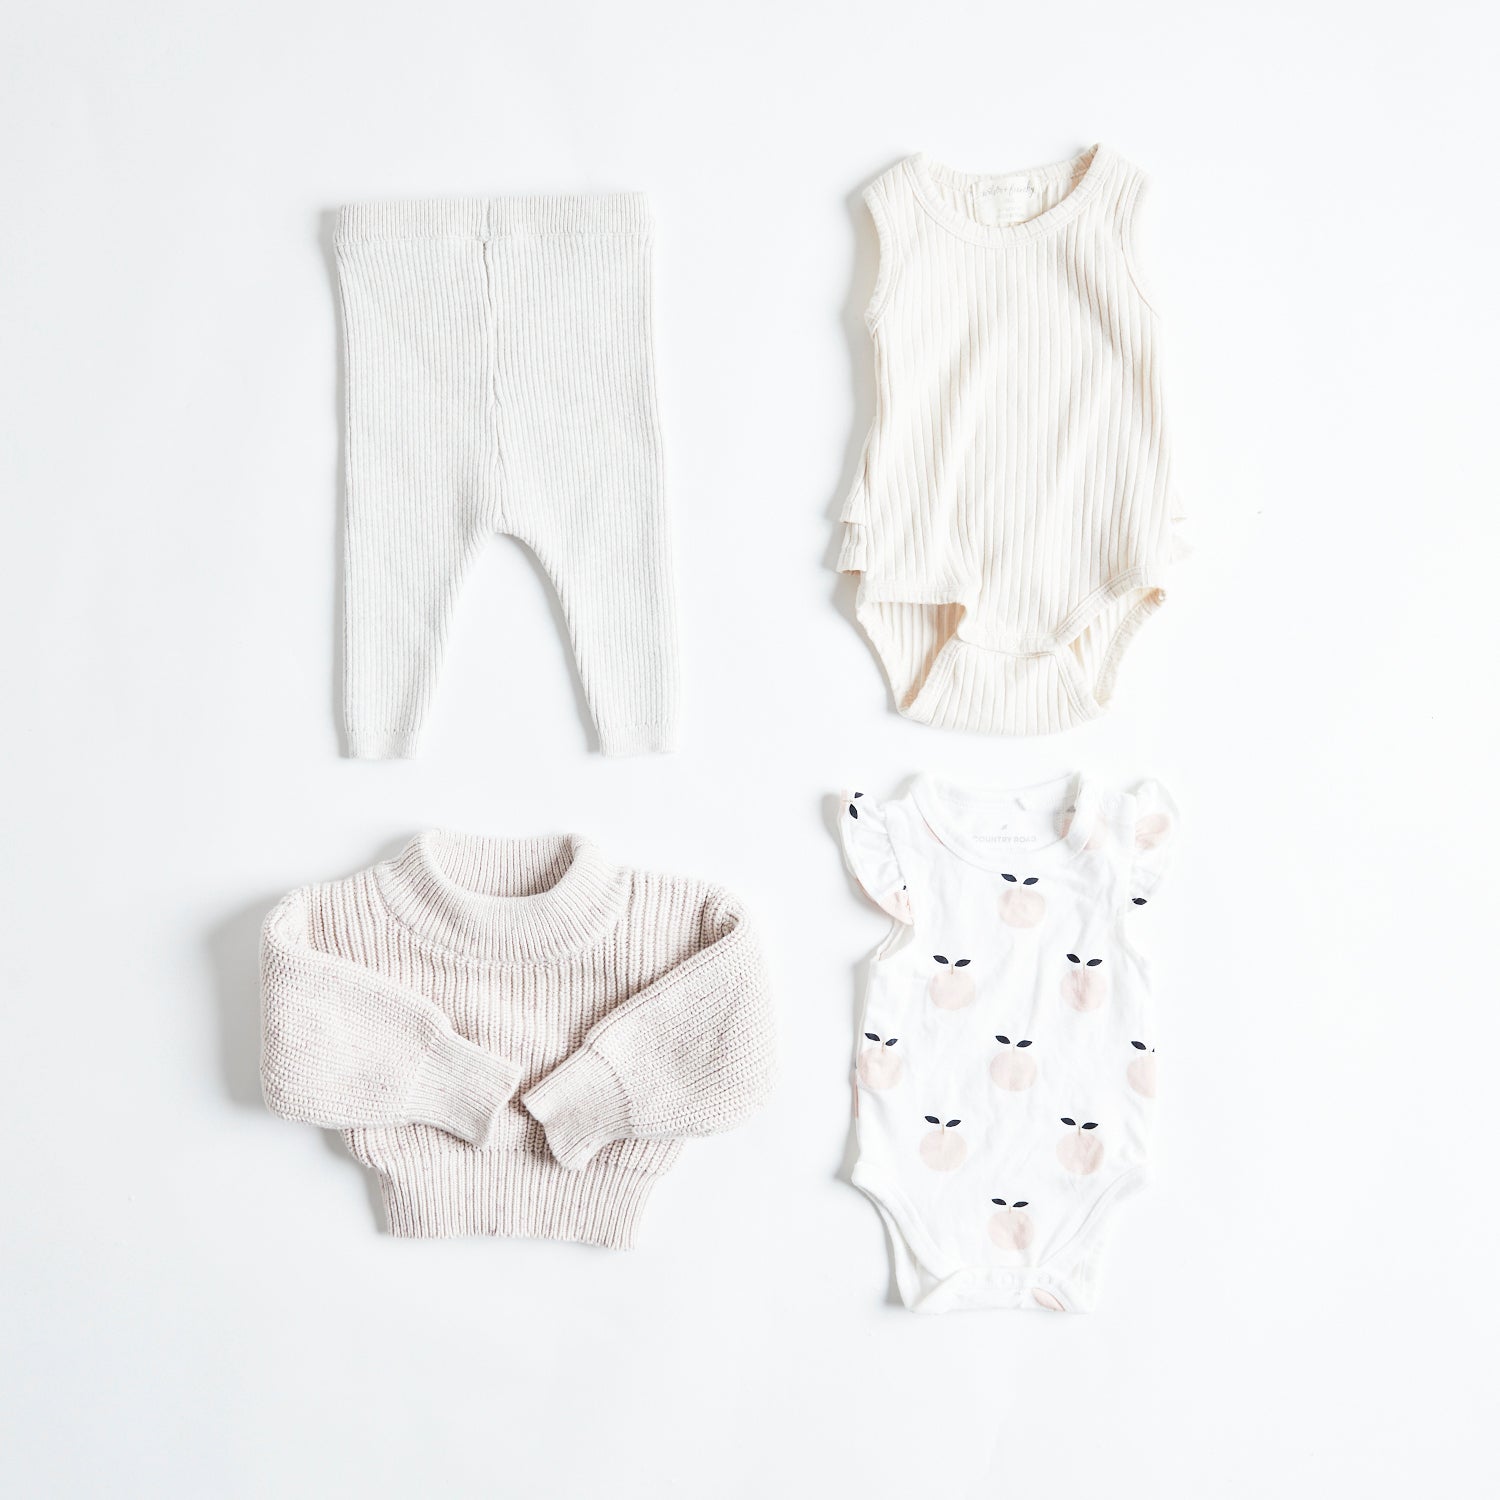 MIXED BRANDS (JAMIE KAY, COUNTRY ROAD WILSON + FRENCHY) 4 PIECE BUNDLE, 0-3M